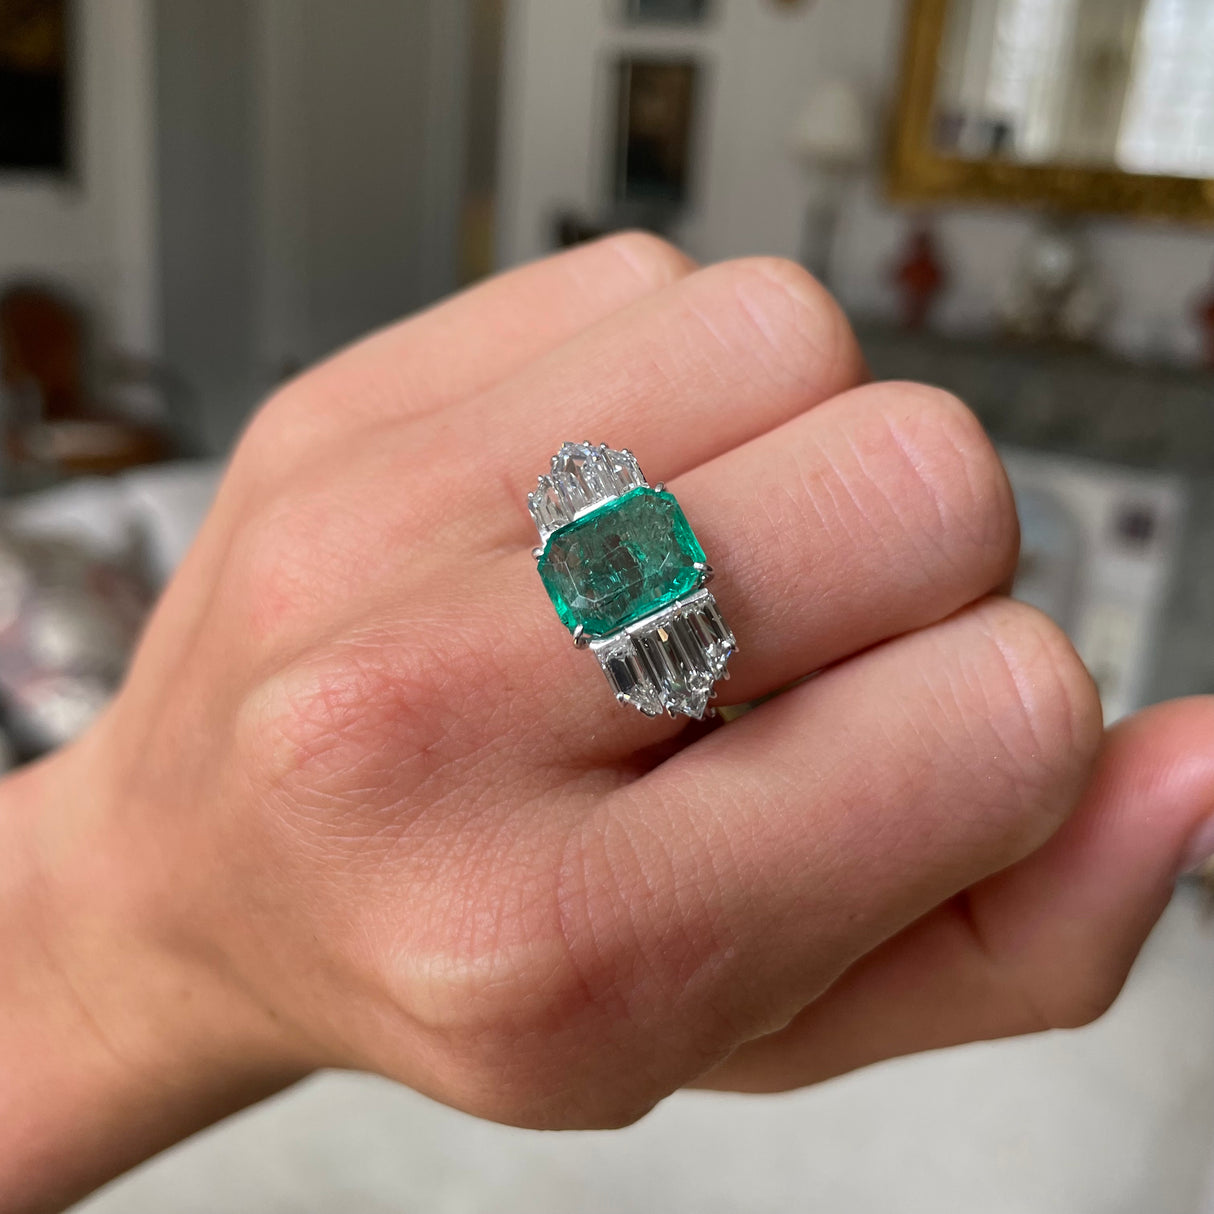 vVintage emerald and diamond engagement ring, worn on hand.